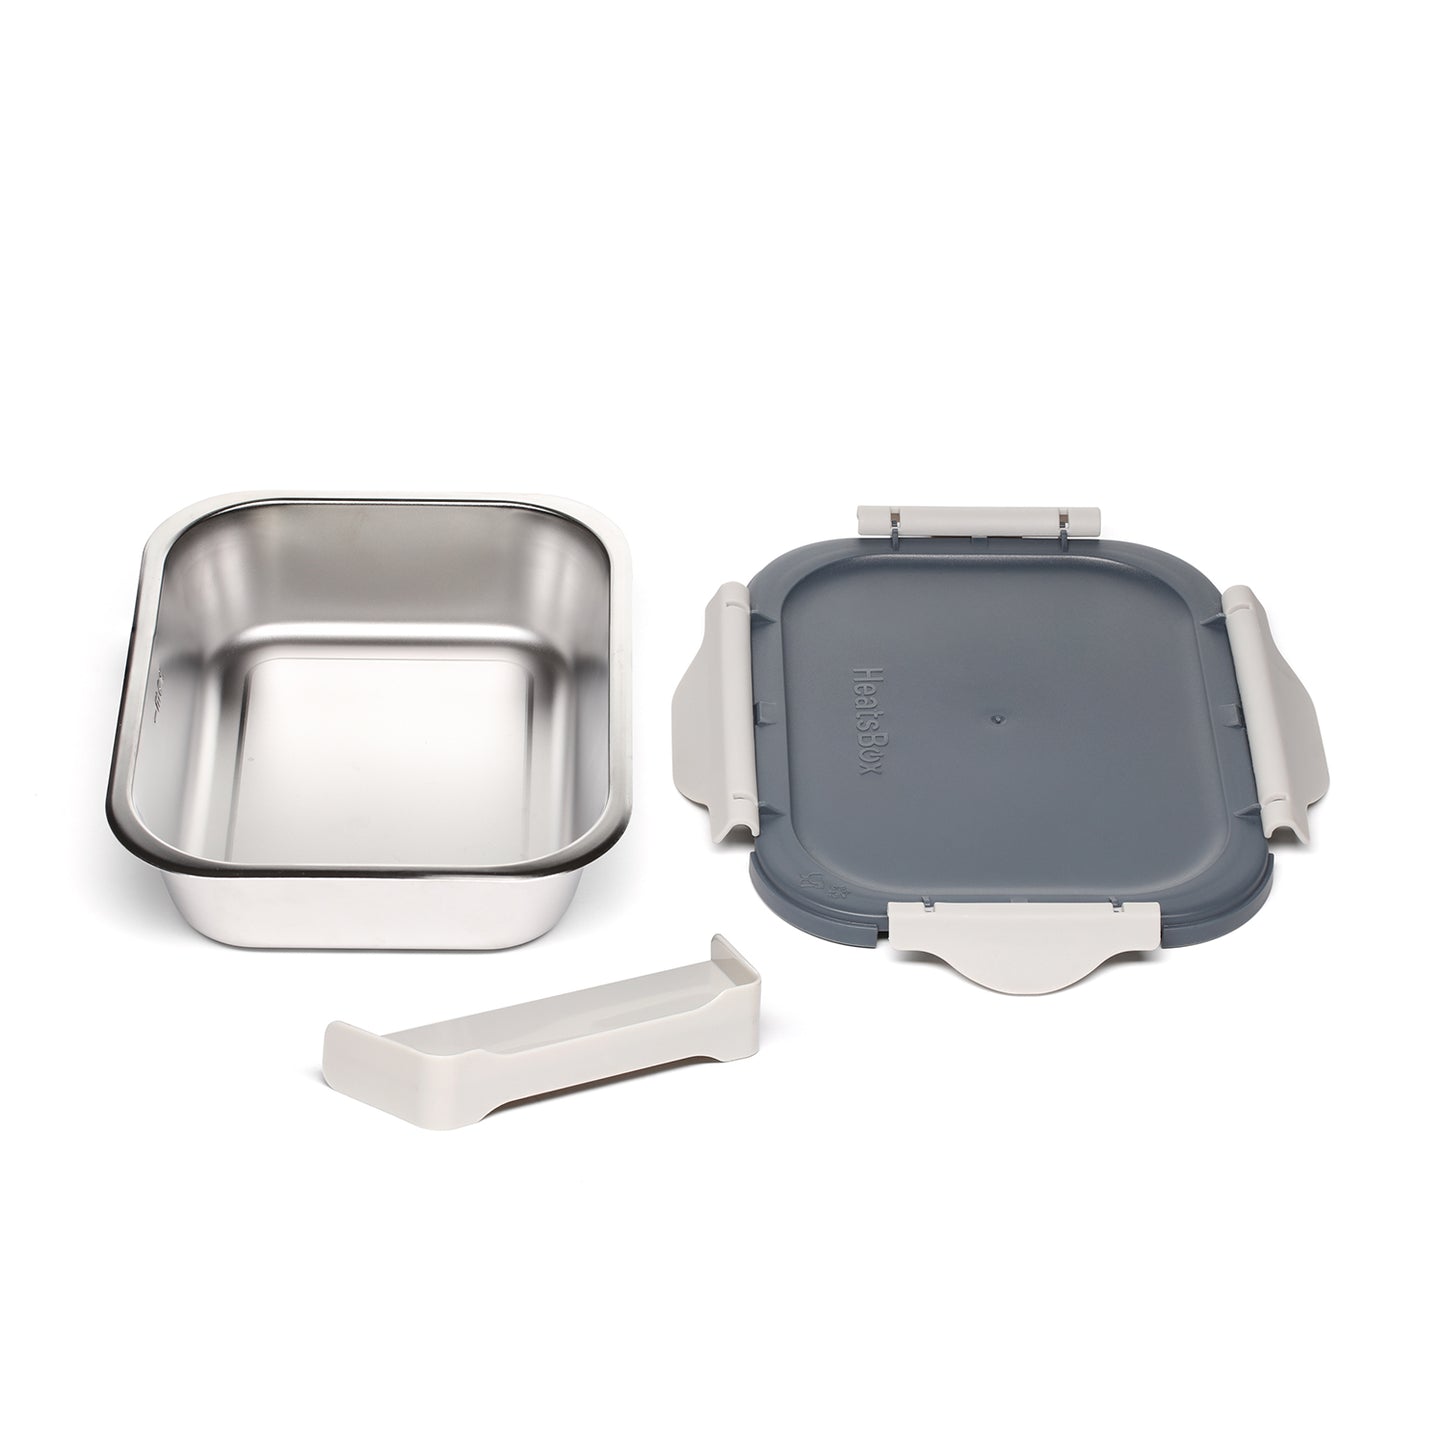 HeatsBox Go and Inner Dish Set  GADGETHEAD New Products Reviewed